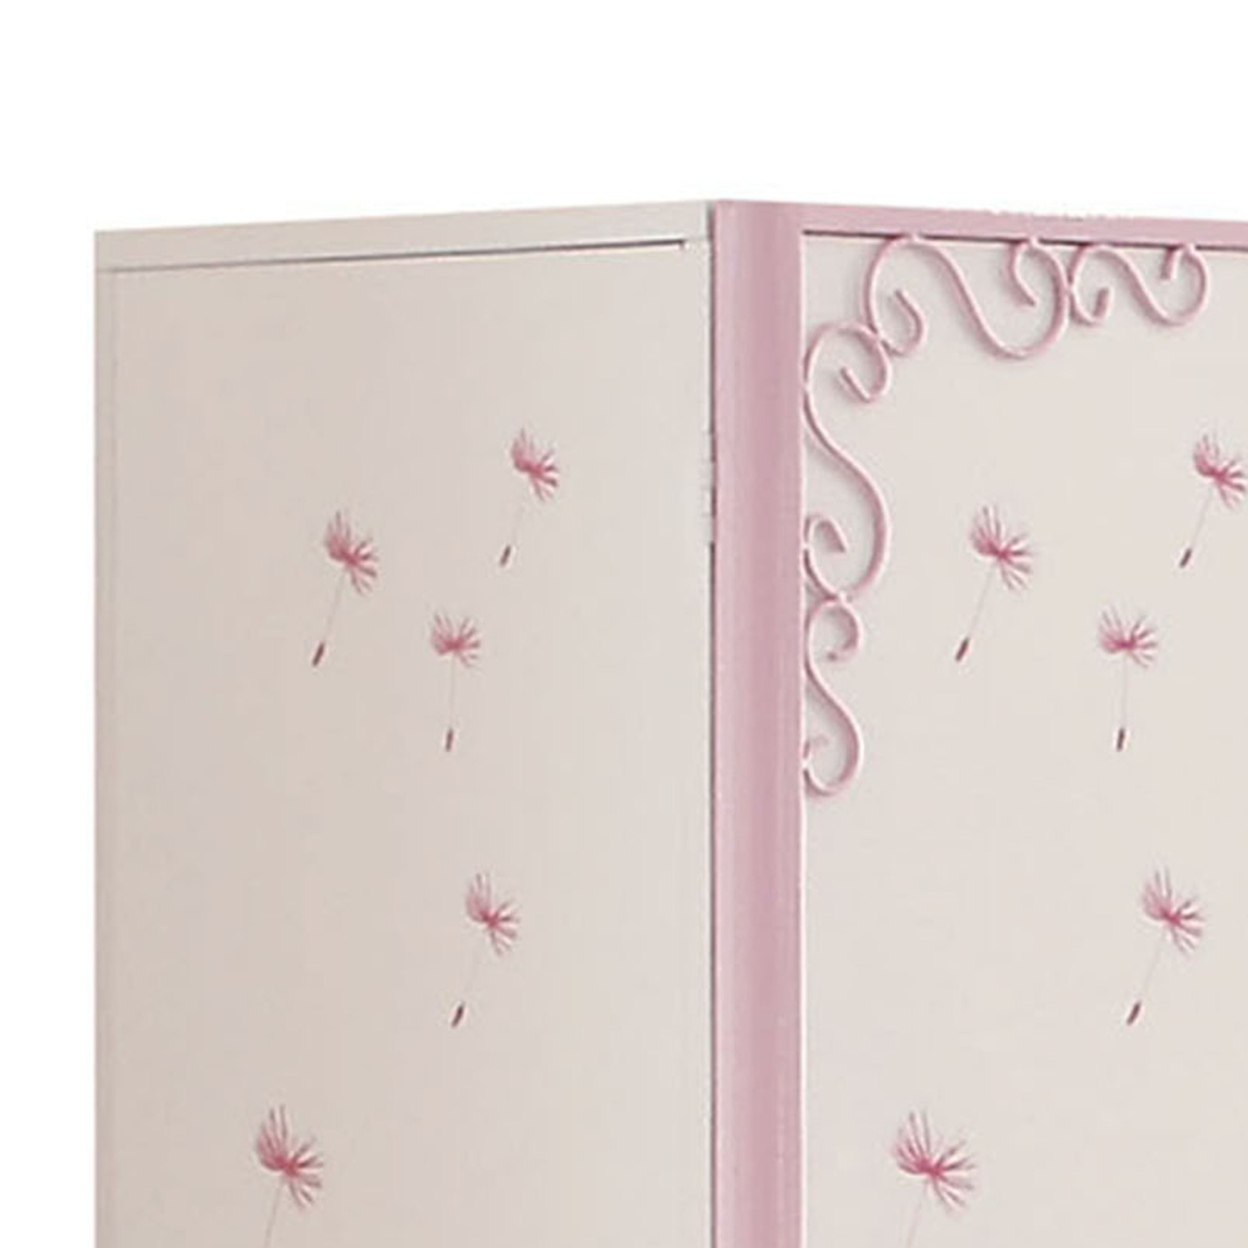 Metal Armoire With Butterfly Handle And Dandelions, White And Purple- Saltoro Sherpi